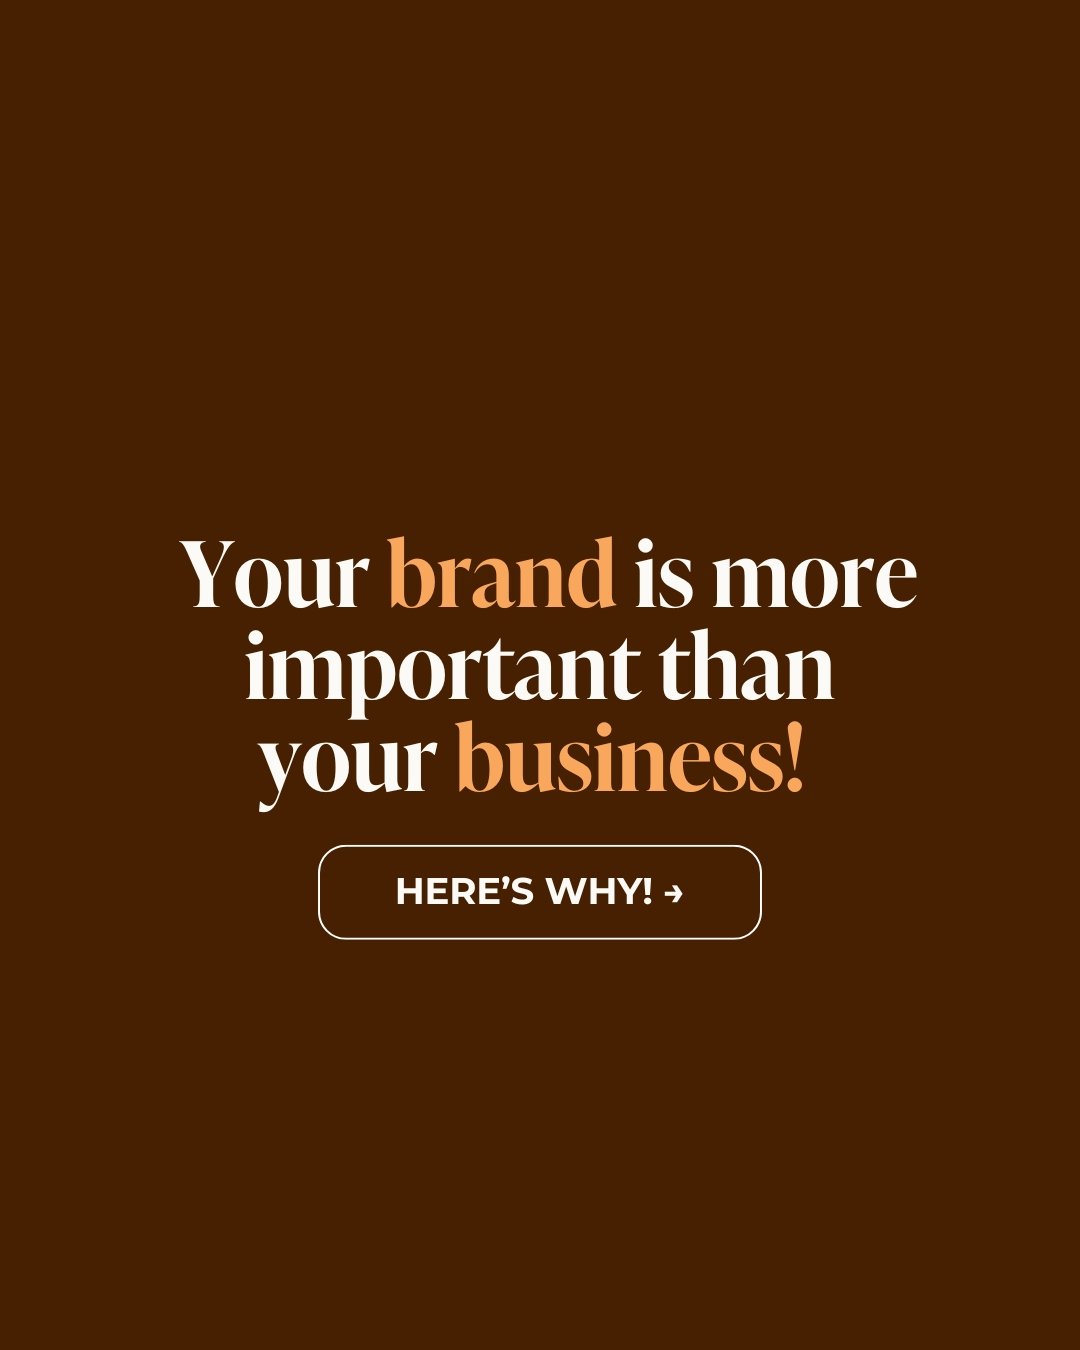 Your business is what you do, your brand is why people care. 📌

Sure, your business offers a product or service. But in a crowded marketplace, what makes you stand out?

Your brand is more than just a fancy logo and colour scheme - it's the heart an